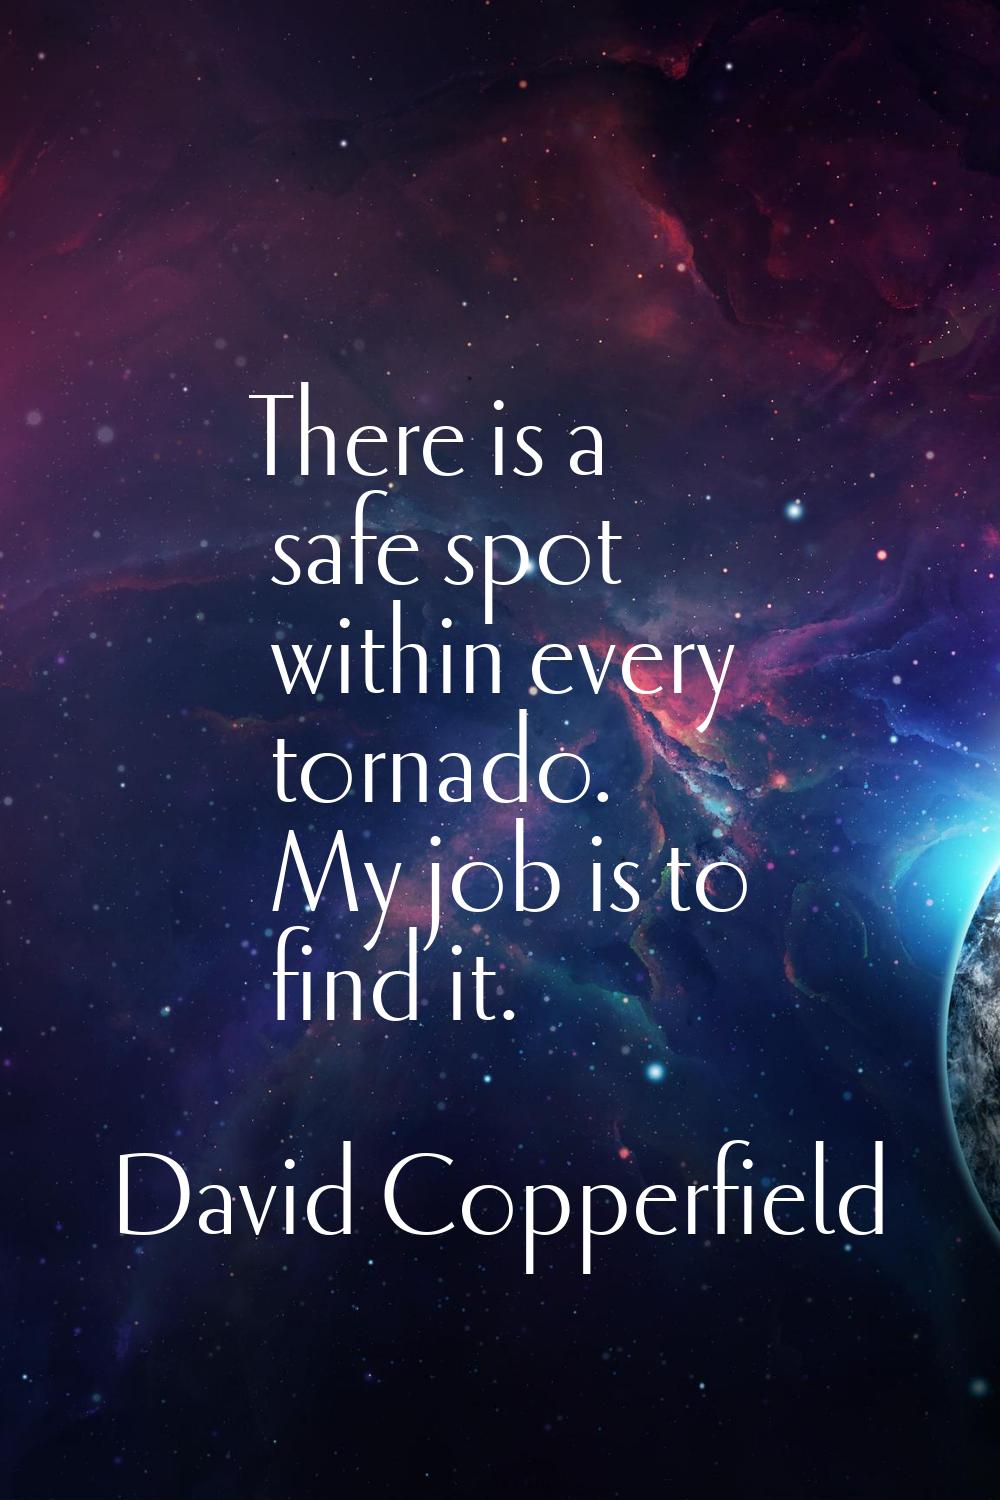 There is a safe spot within every tornado. My job is to find it.